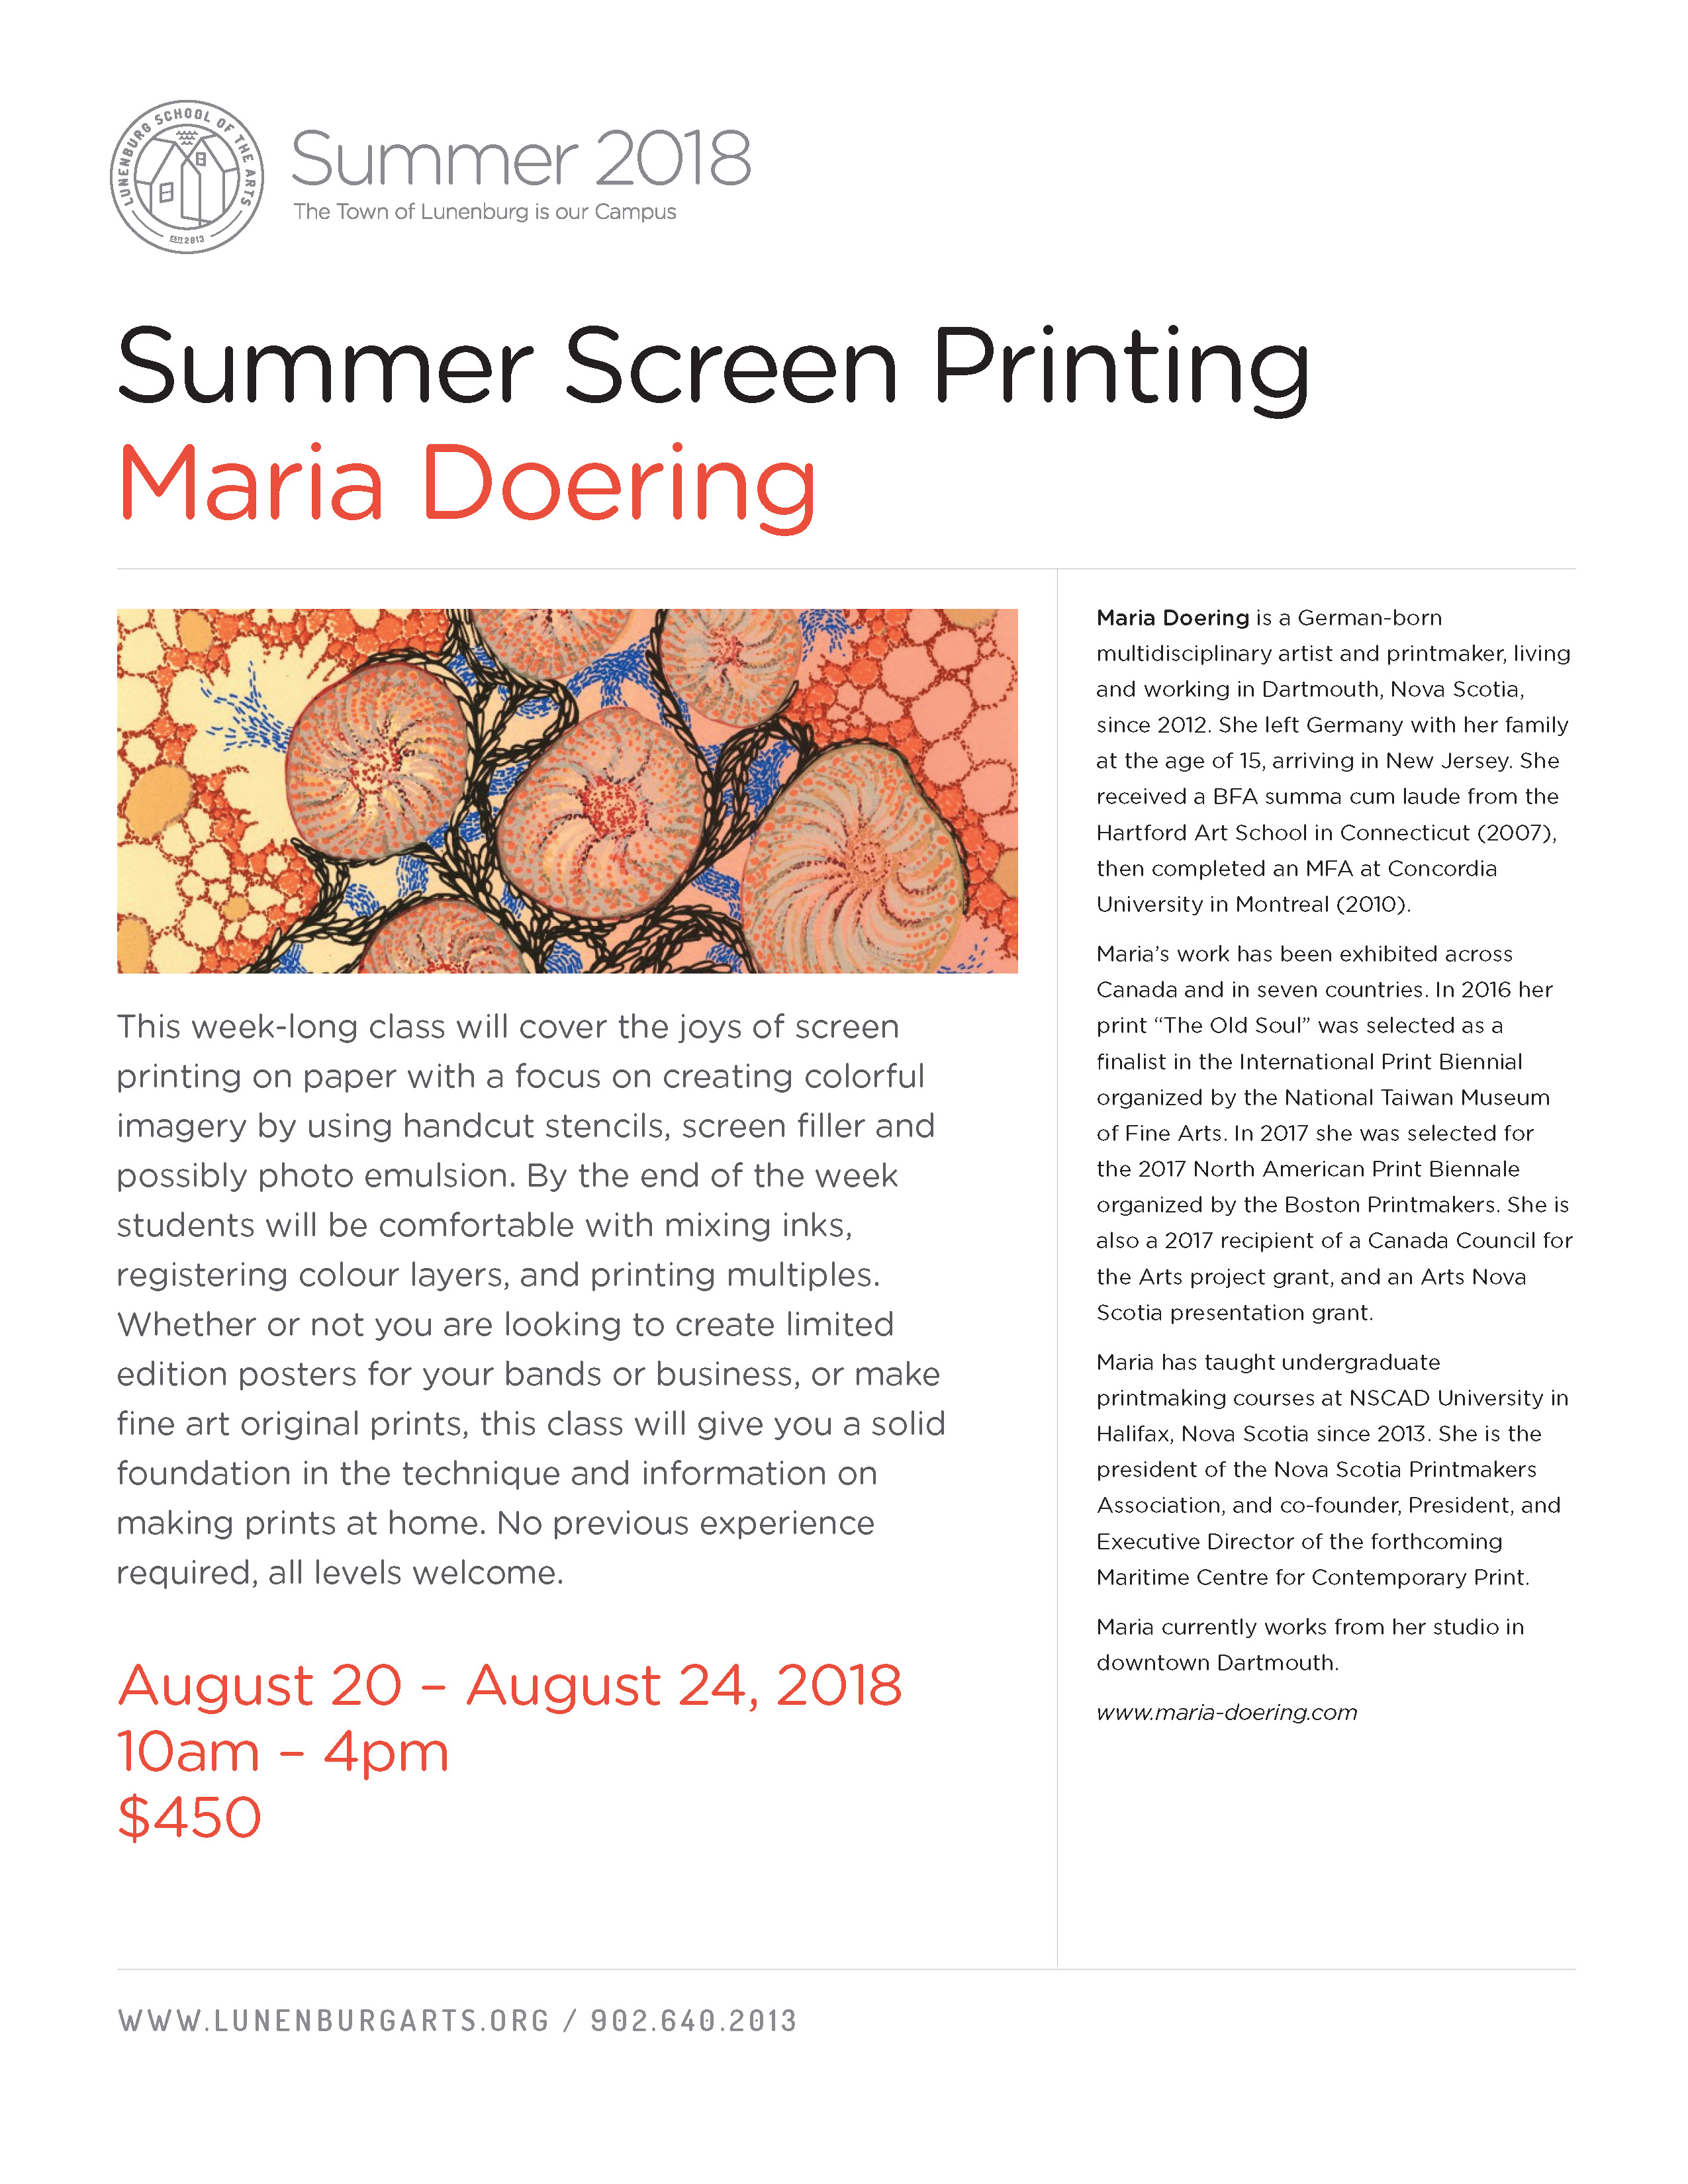 Maria Doering is teaching Screen printing at LSA in August